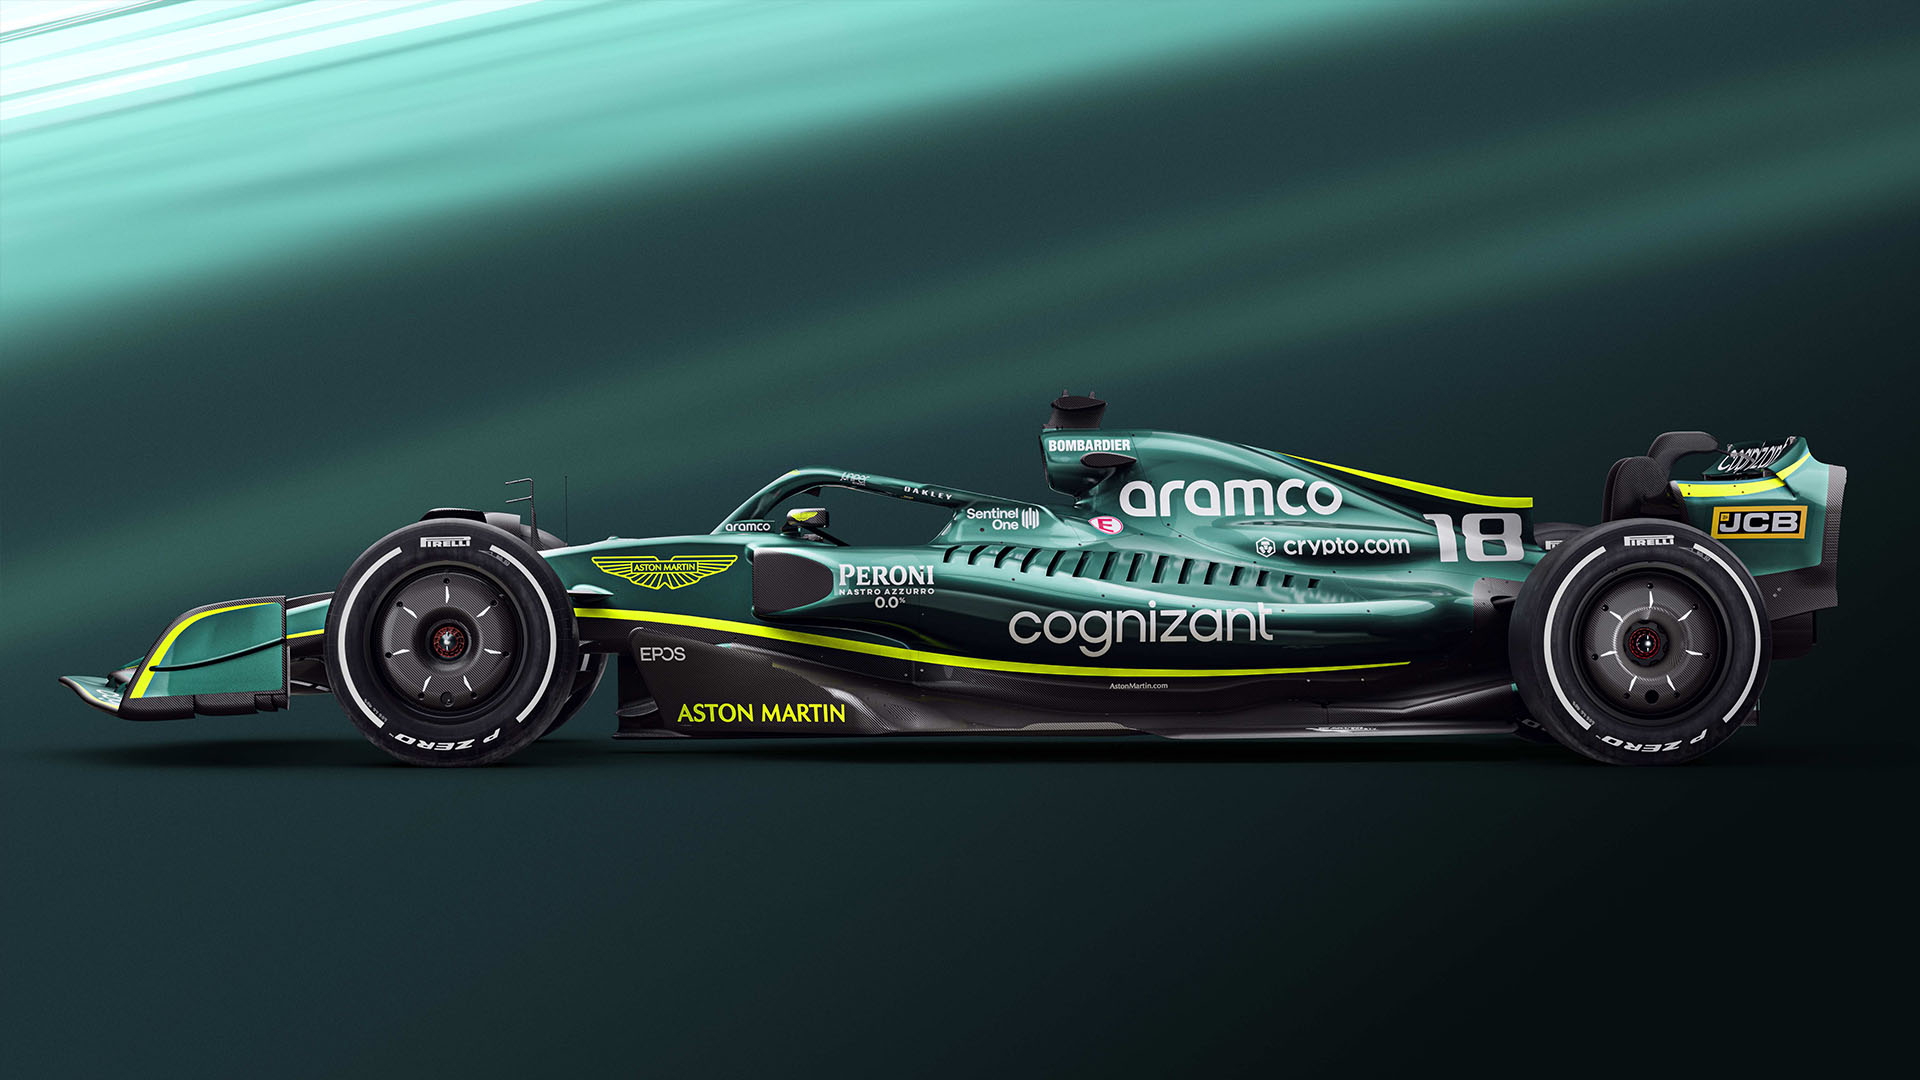 Aston Martin reveal 2022 car with revised livery. Formula 1®